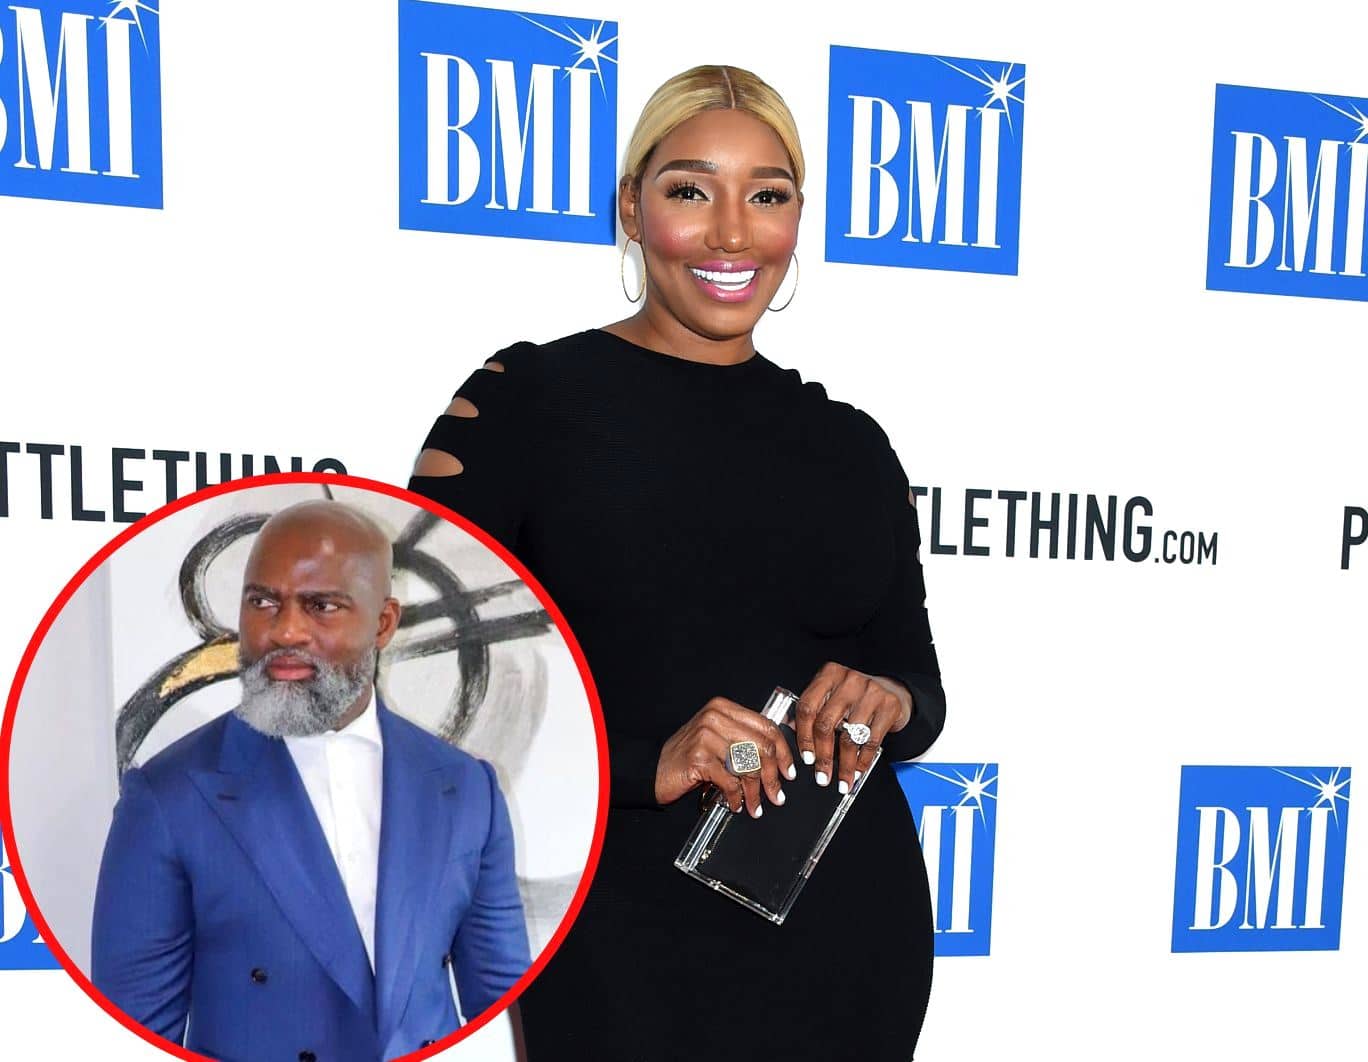 Nene Leakes' Boyfriend Nyonisela Sioh Files for Divorce From Wife Malomine Amid Her Lawsuit Against the RHOA Alum